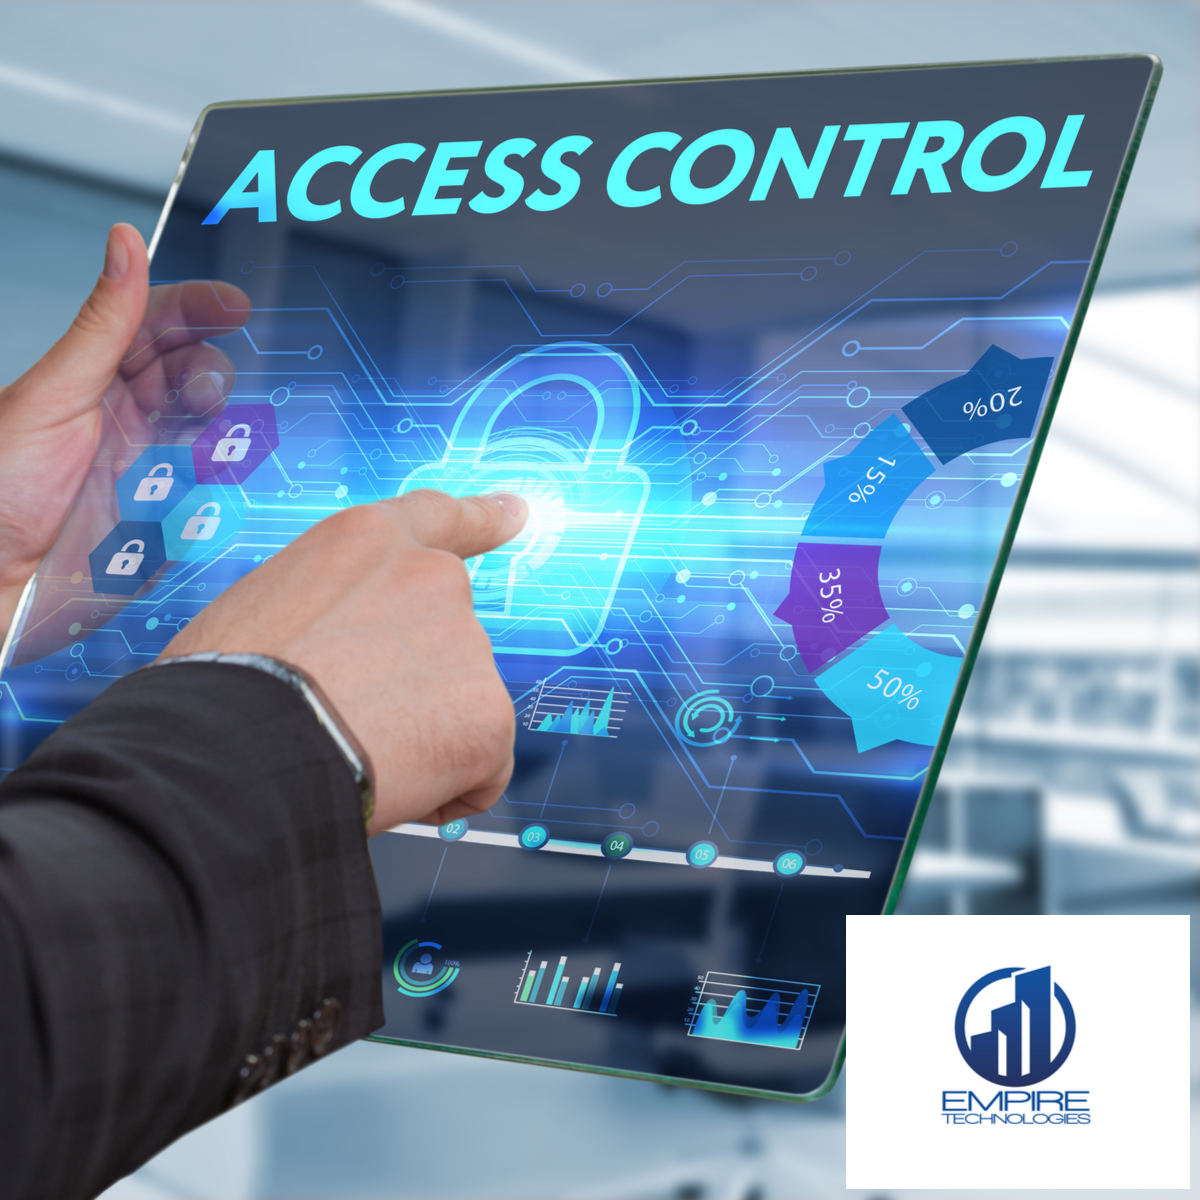 Does My Business Need Access Control System Installation?